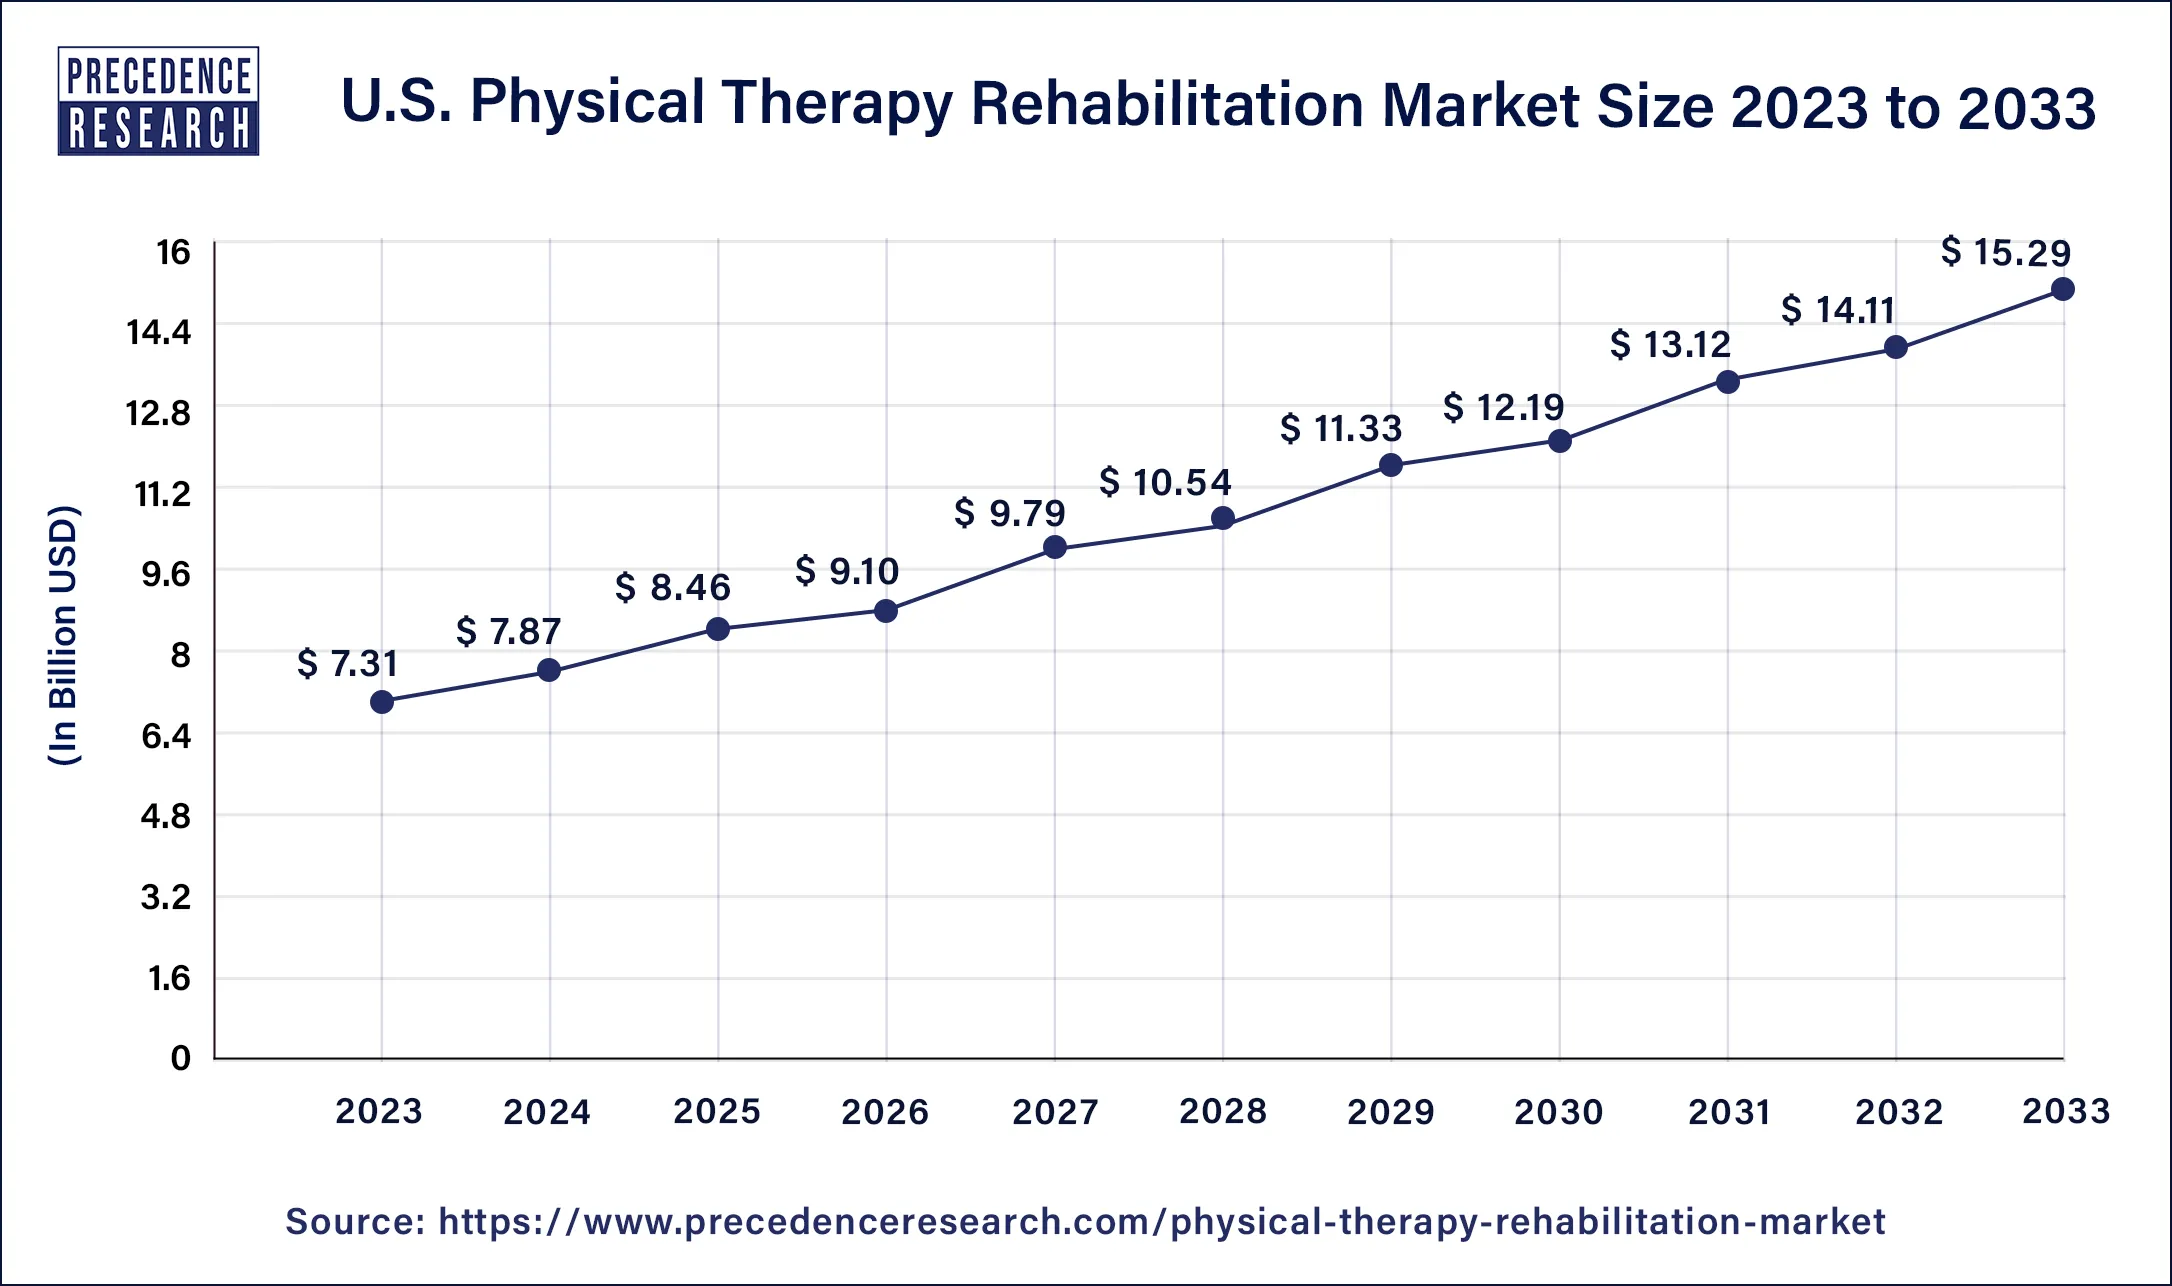 U.S. Physical Therapy Rehabilitation Market Size 2024 to 2033